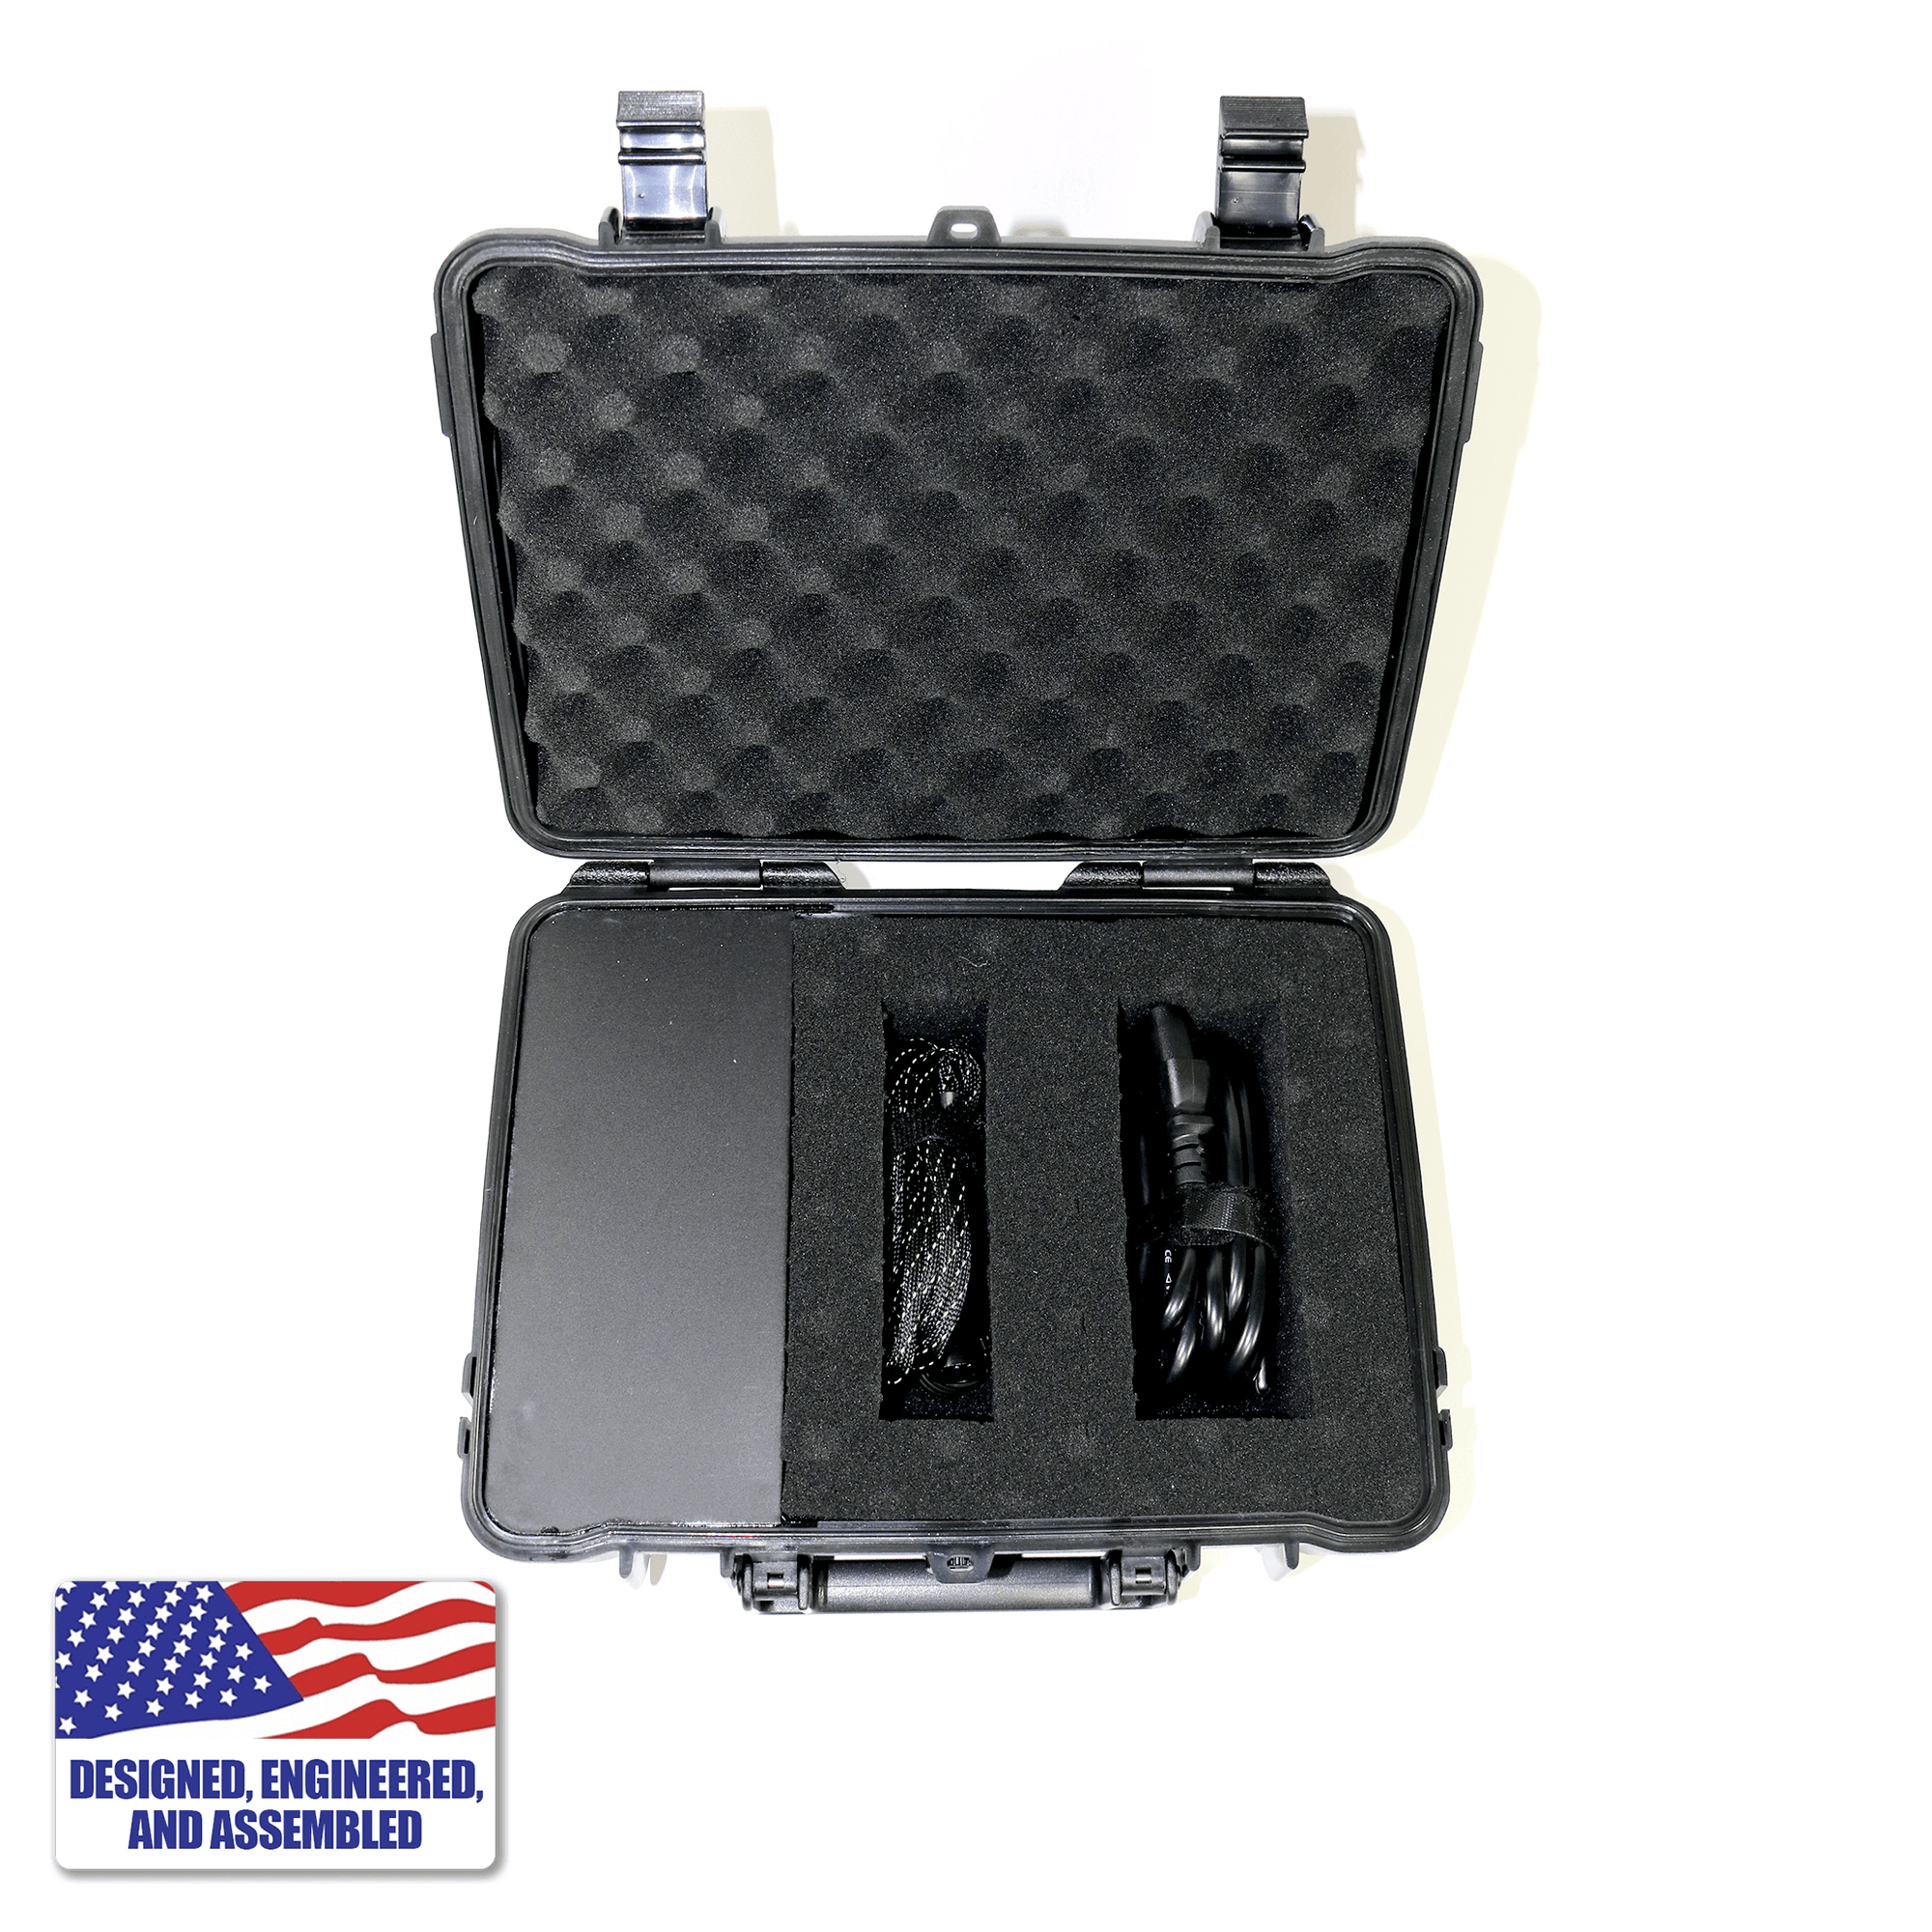 Portable Enail Case in Black - 3/4 Plugged In View